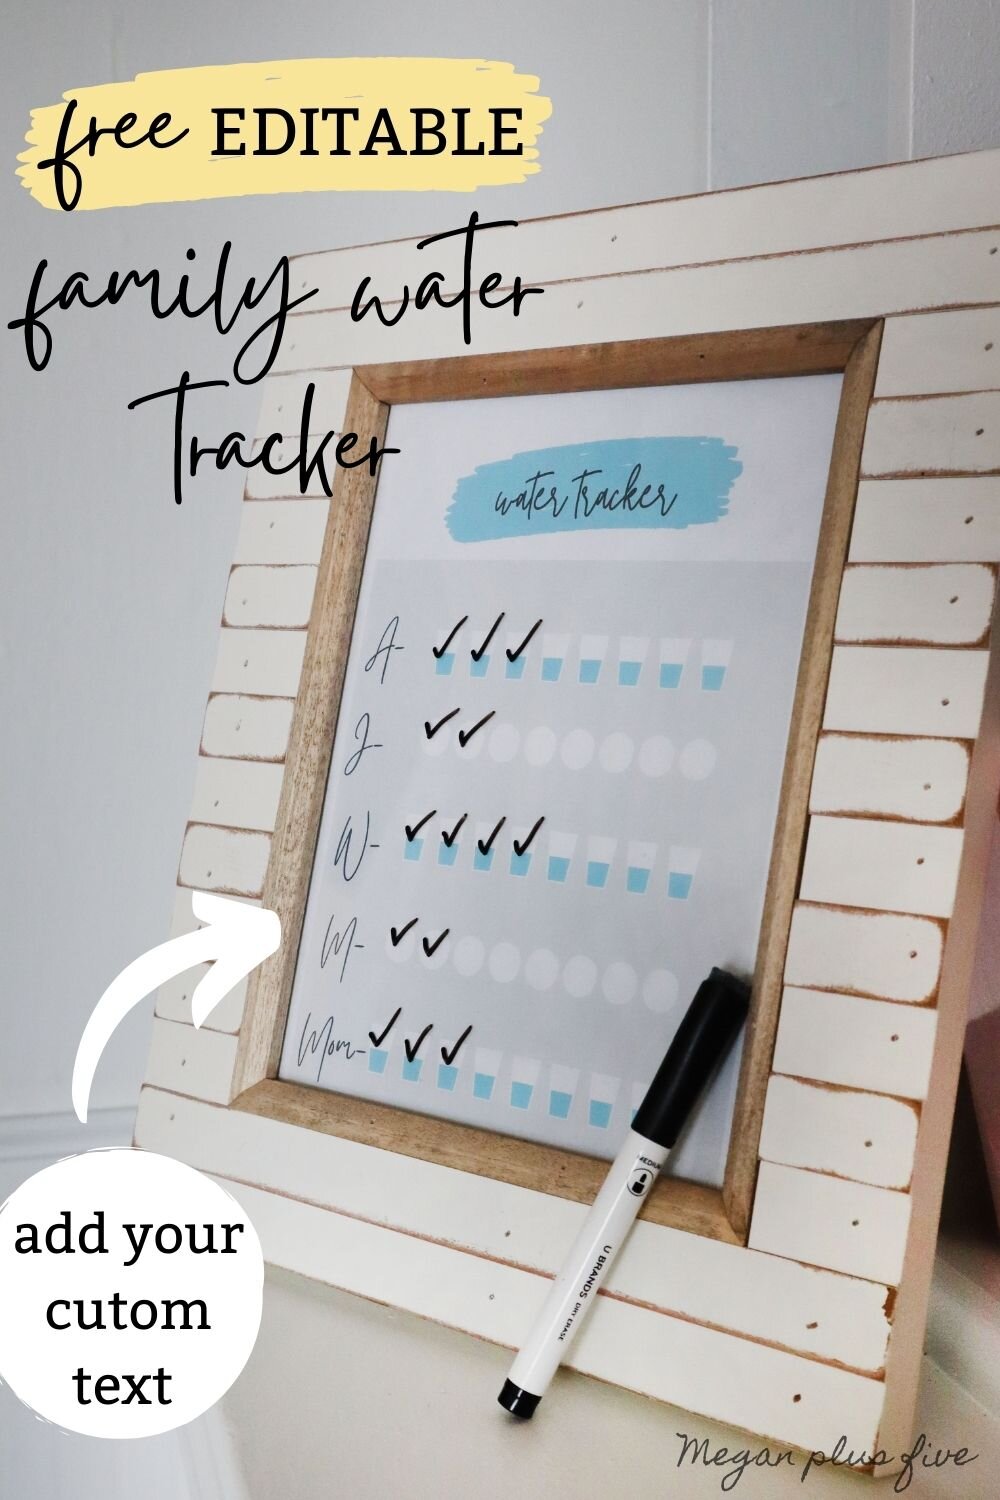 FREE PRIBTABLE family water tracker. Download this free water tracking print to use as a family. Help and encourage your kids to keep hydrated with the modern print to put in your home. Place in a picture frame and use a dry erase marker to check the amount of water consumed throughout the day.